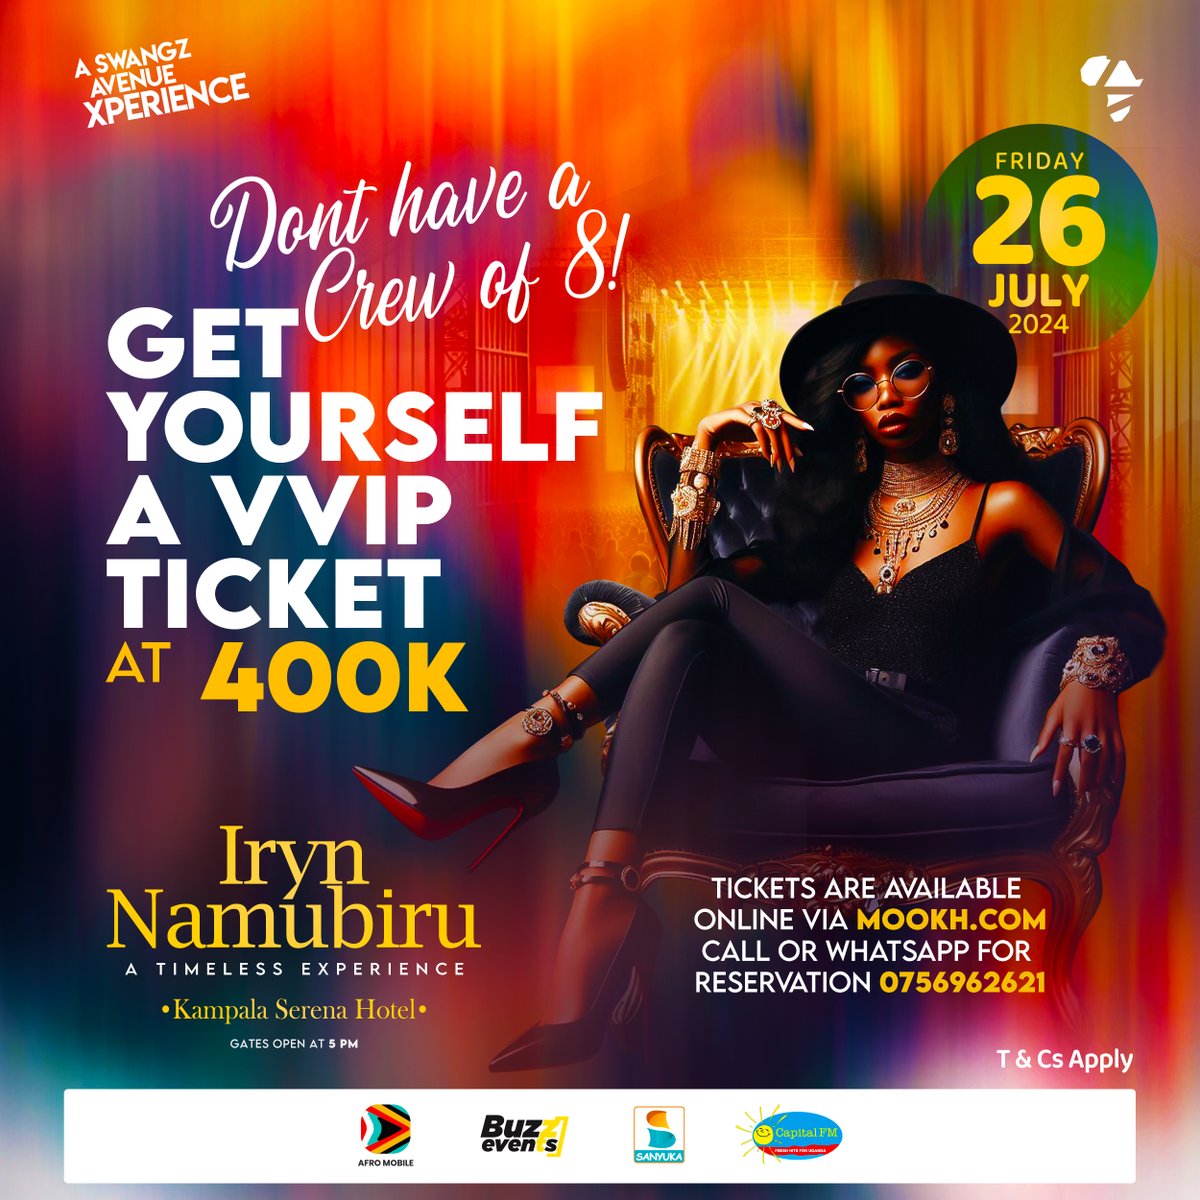 Concerts are beautiful to attend, but attending them the VVIP way makes the concert an unforgettable experience.

@irynnamubiru & @Swangz_Avenue have set aside a VVIP treat just for you to enjoy the #TimelessExperience, at a fee of only 400K.

Ticket Link:
mookh.com/event/iryn-nam…